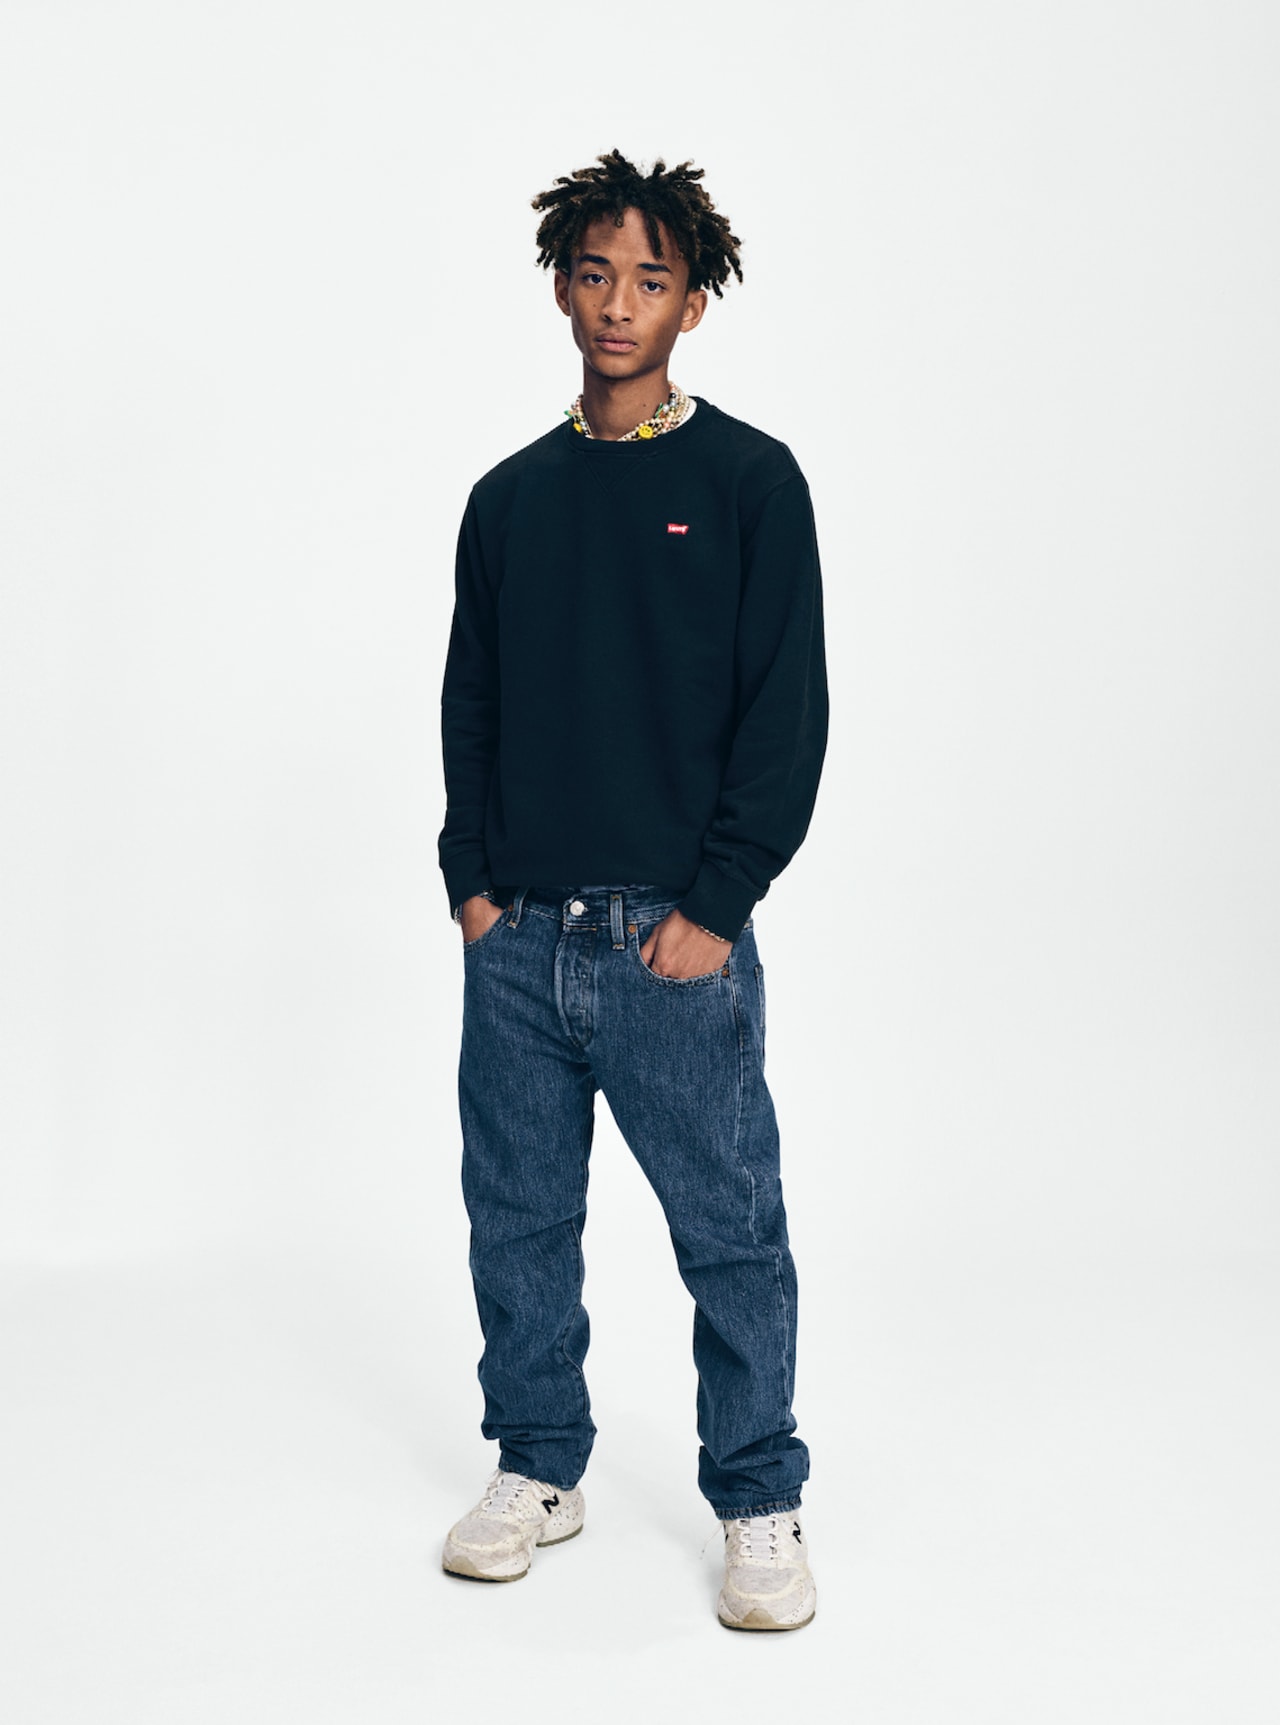 Levi's Celebrates 501 Day With Full Day of Programming and Exclusive Drops  | Complex